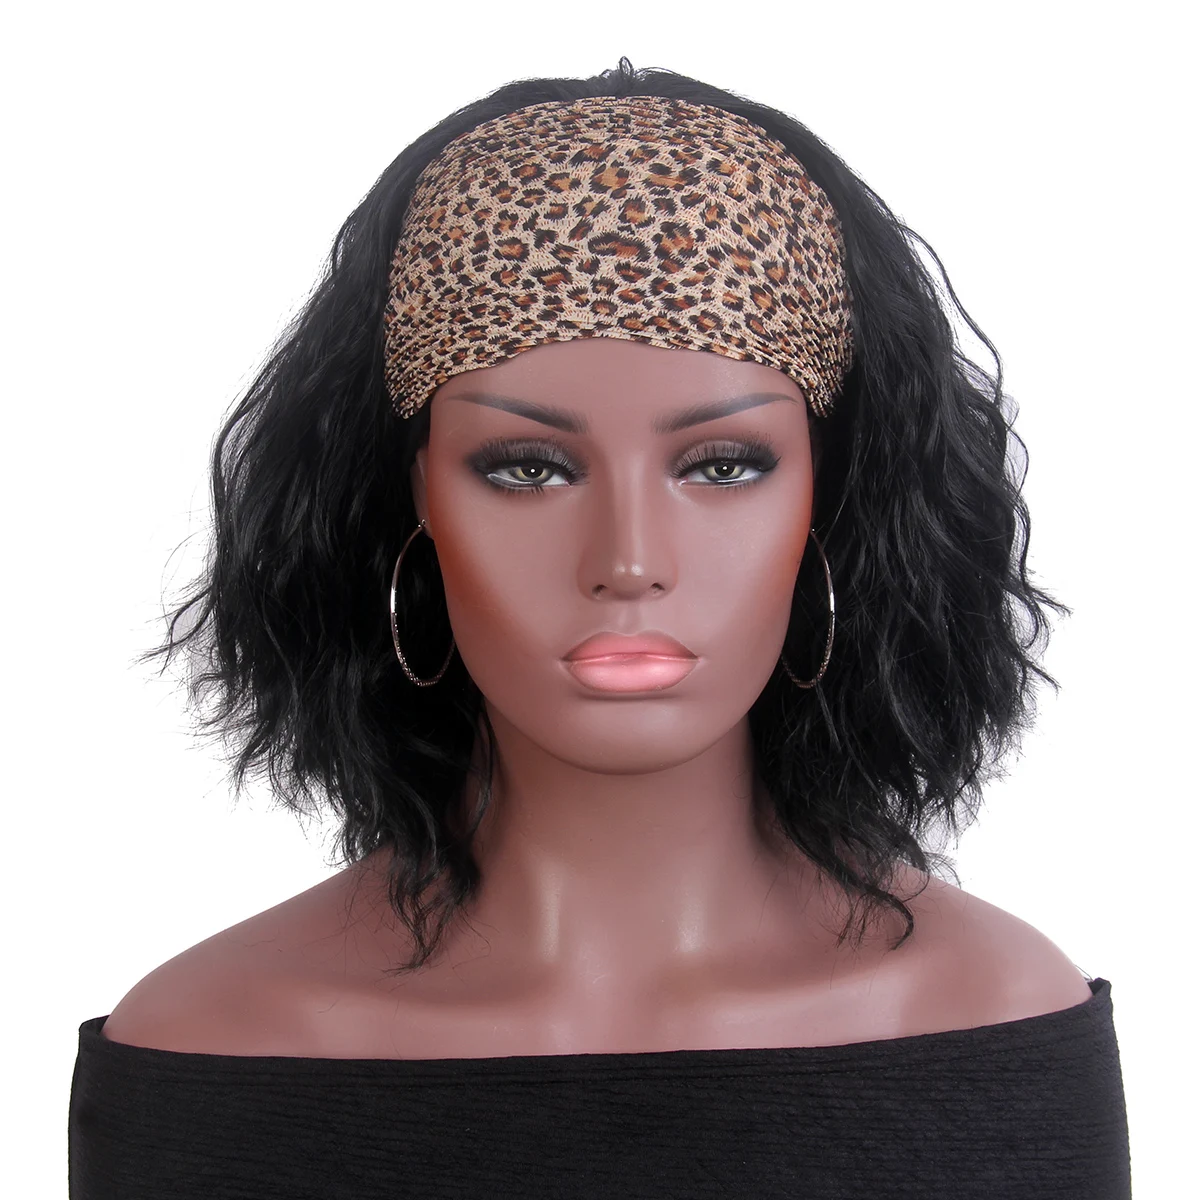 

Wholesale African American Elastic Adjudtable Body Wave Afro Wigs Synthetic Black Hair Headband Wig For Black Women, Customized colors